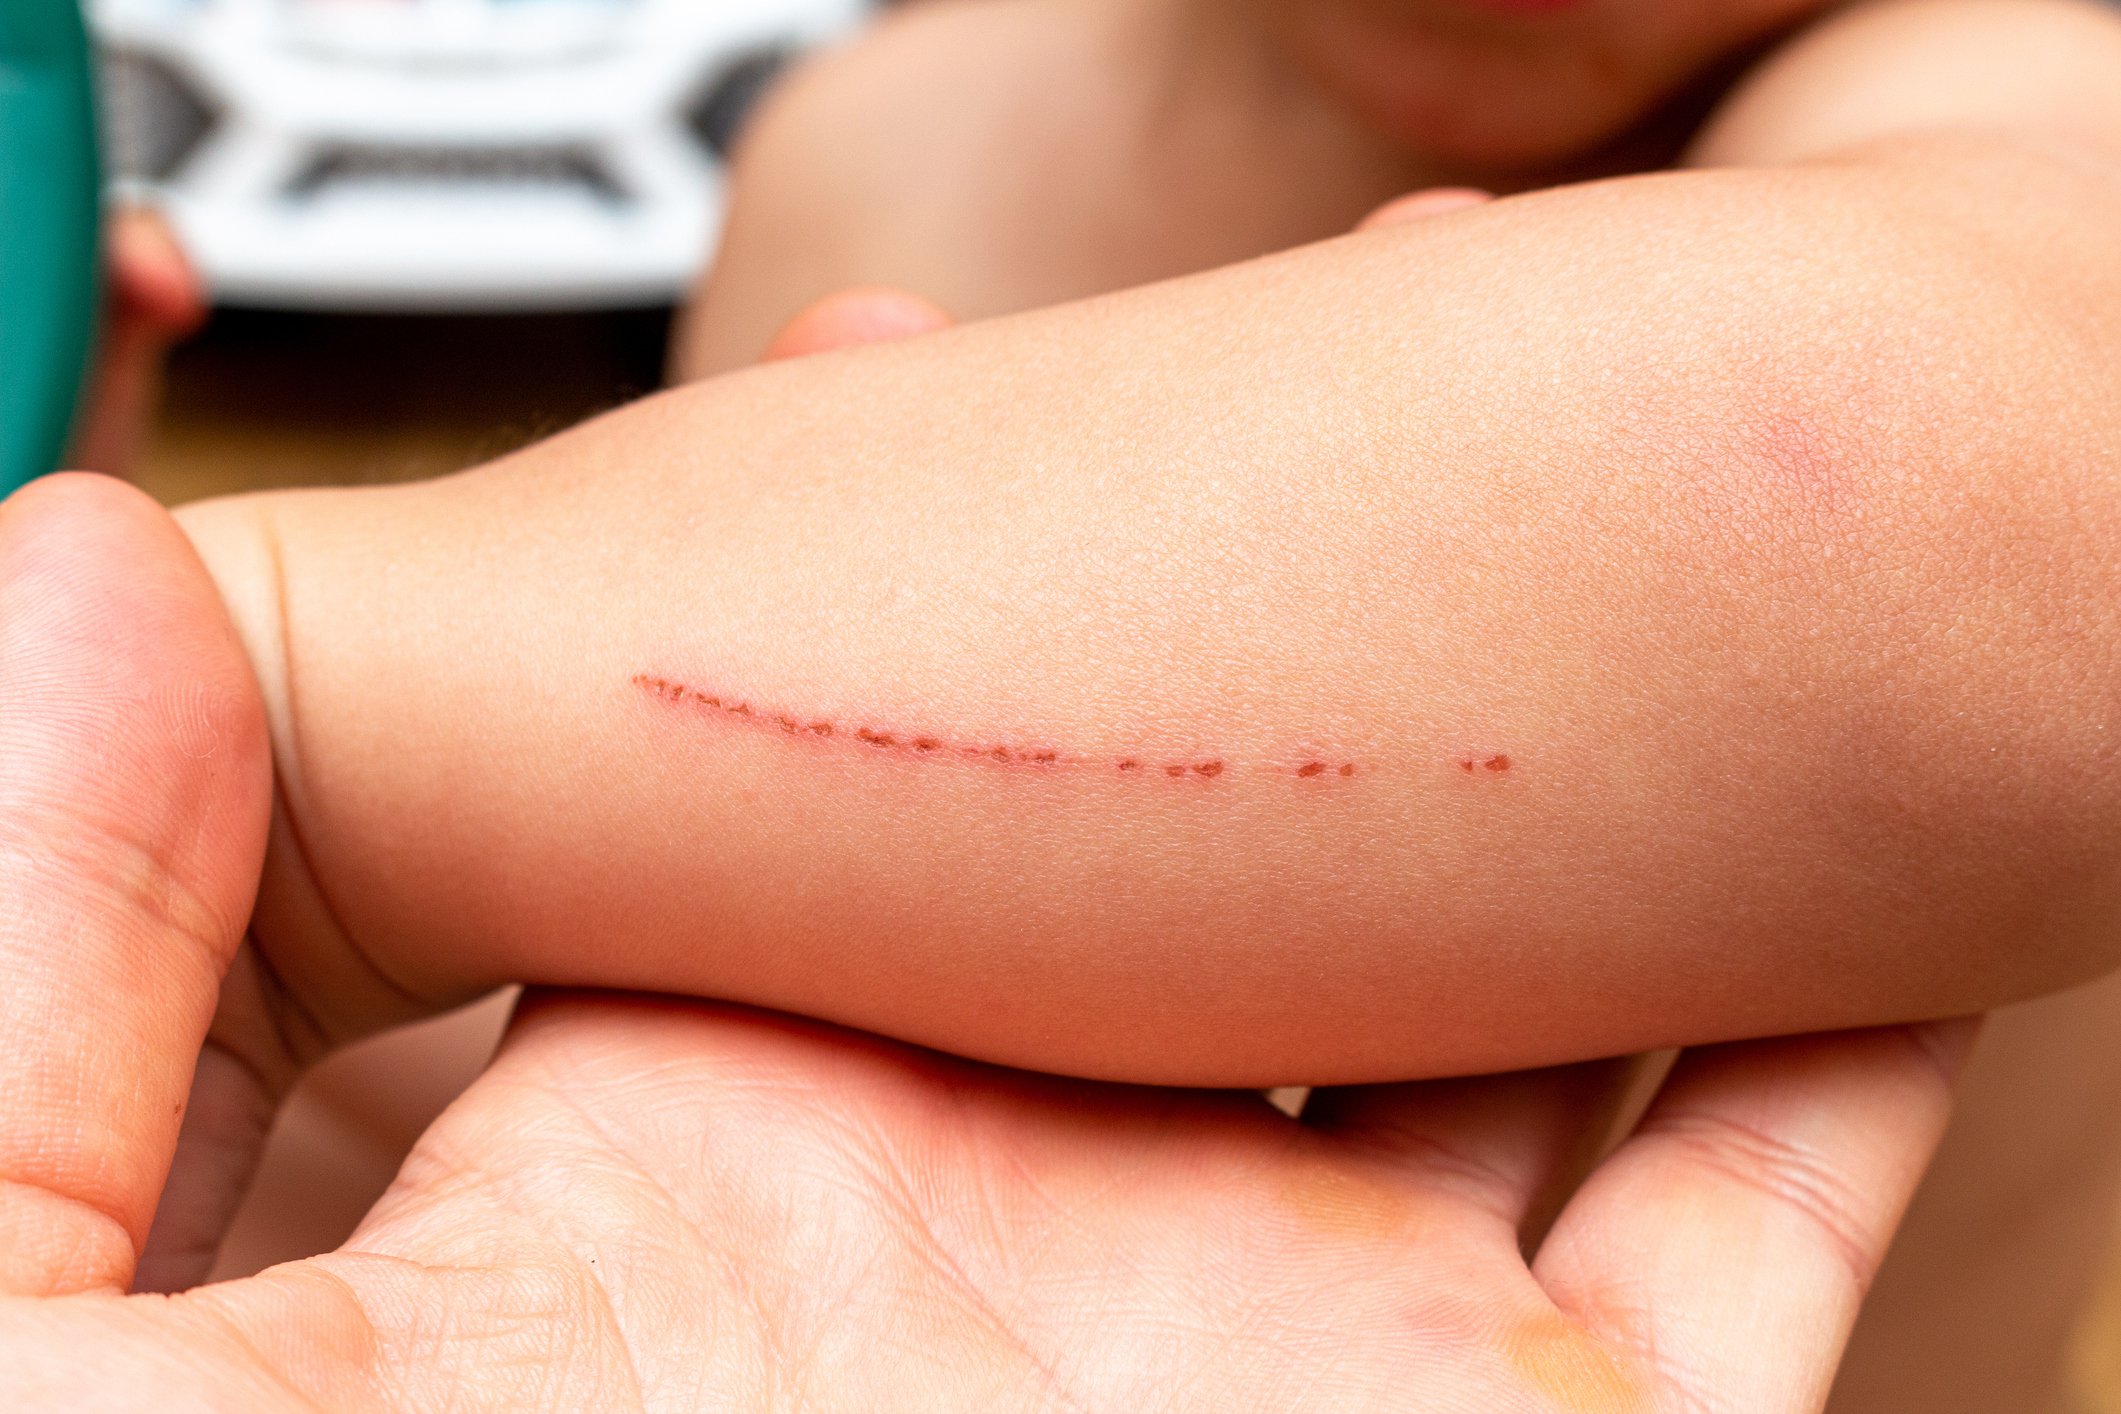 wounds, scratches, abrasions on the child's hand, wrist, forearm close up